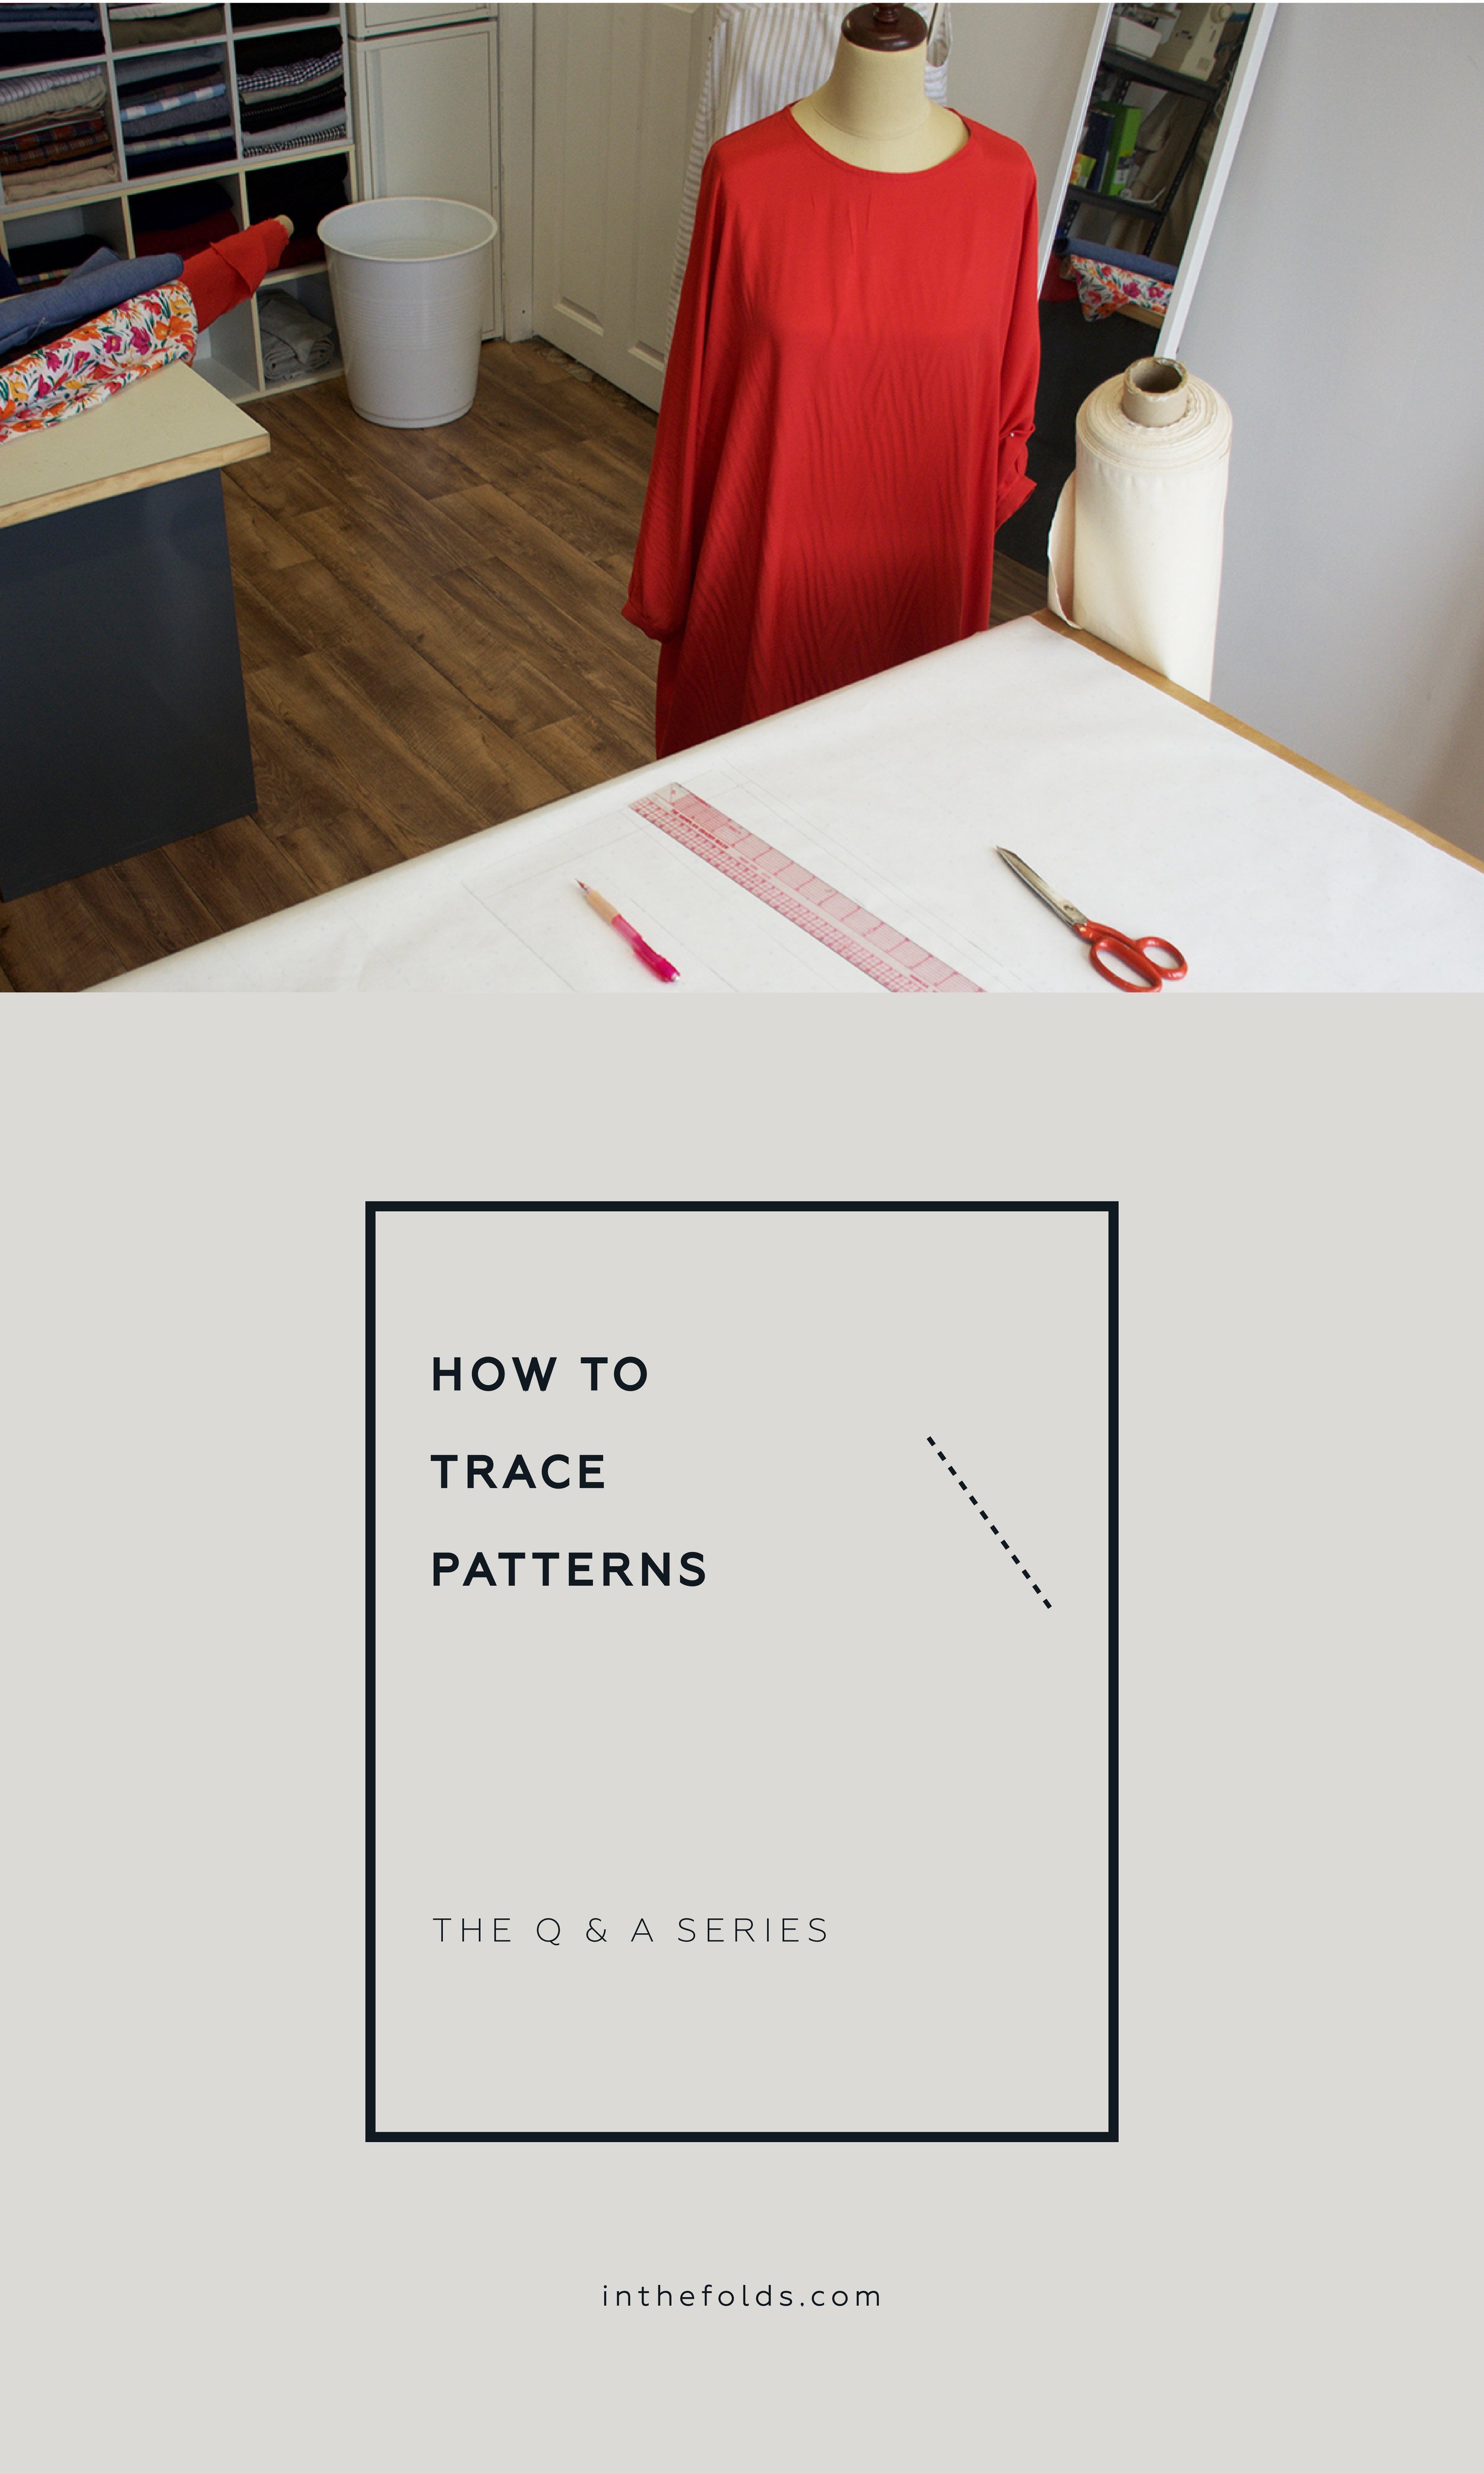 Tilly and the Buttons: Tips for Tracing Sewing Patterns